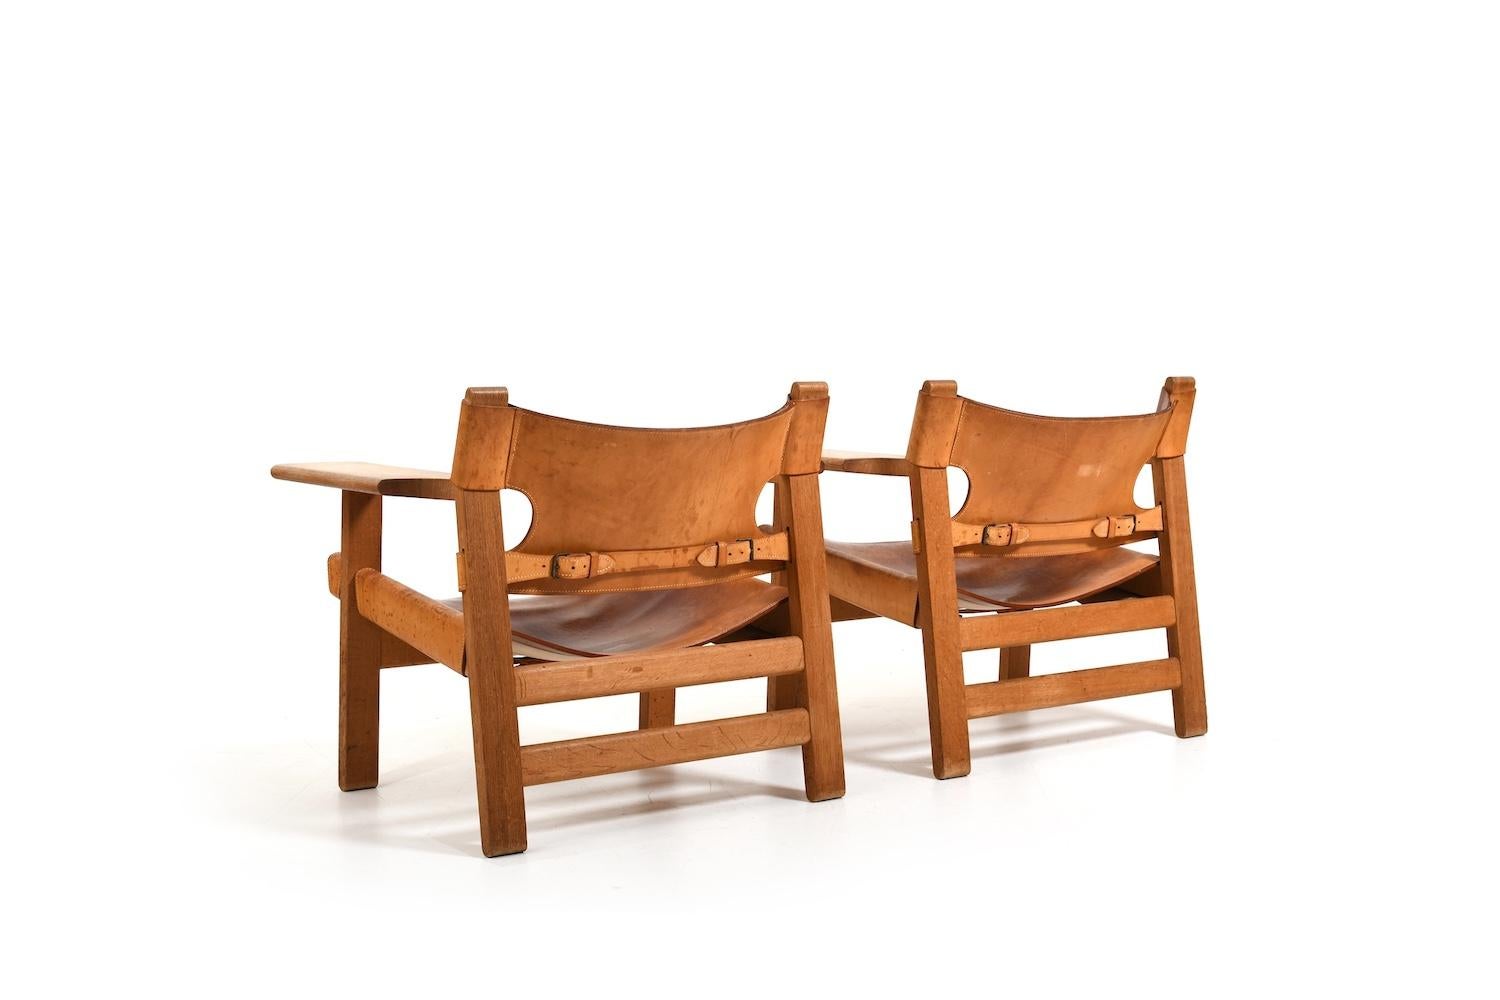 Pair of Old Spanish Chairs by Børge Mogensen early 1960s For Sale 1